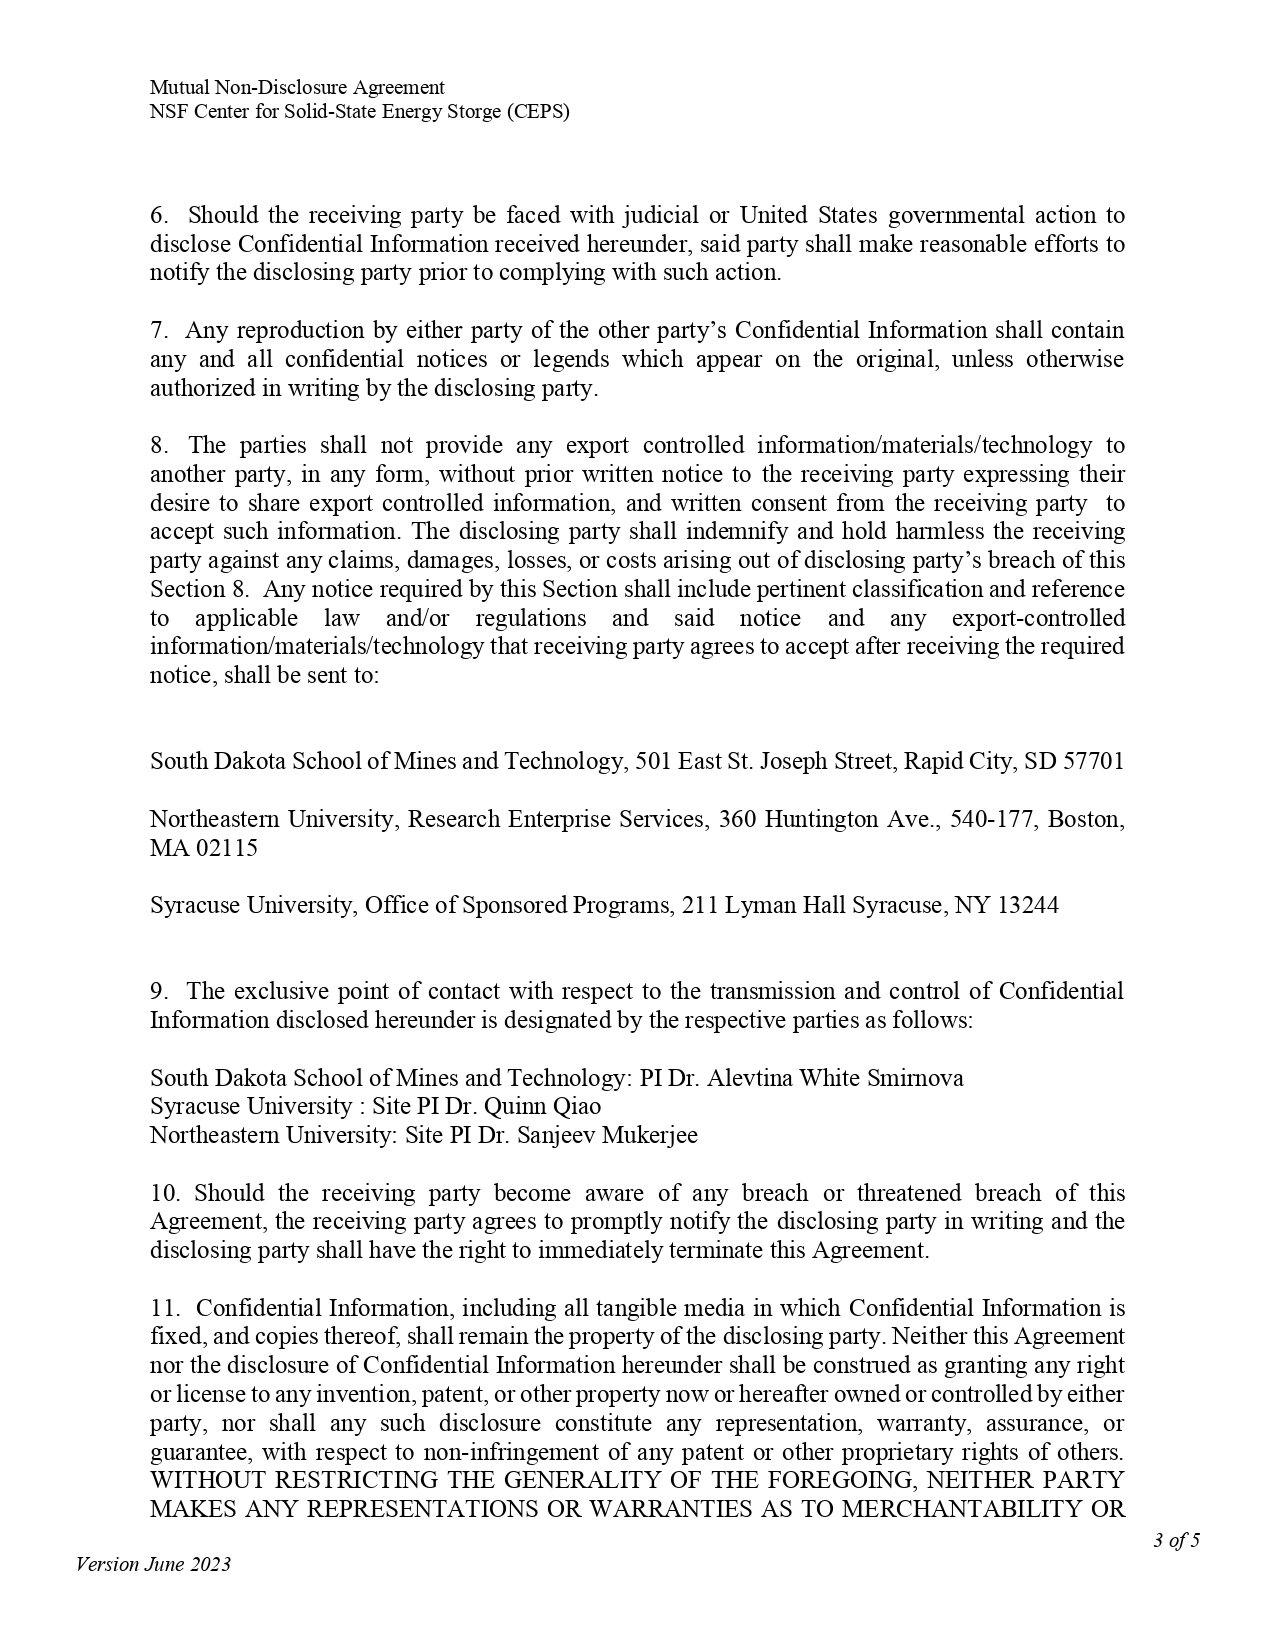 IUCRC CEPS Non-Disclosure Agreement June 2023_page-0003.jpg